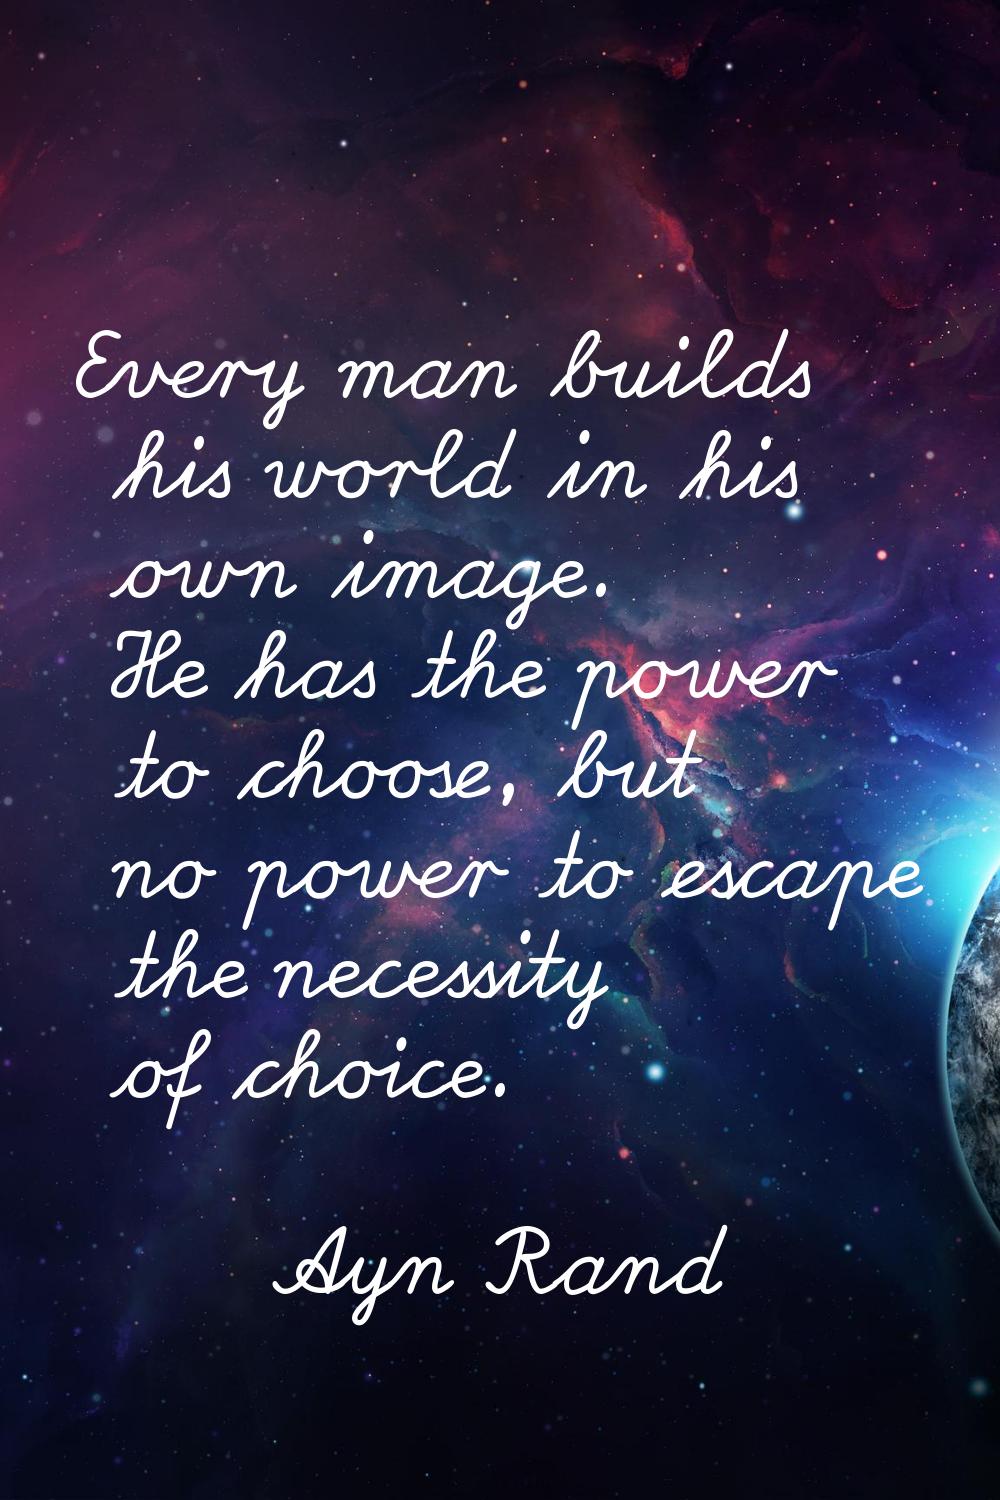 Every man builds his world in his own image. He has the power to choose, but no power to escape the